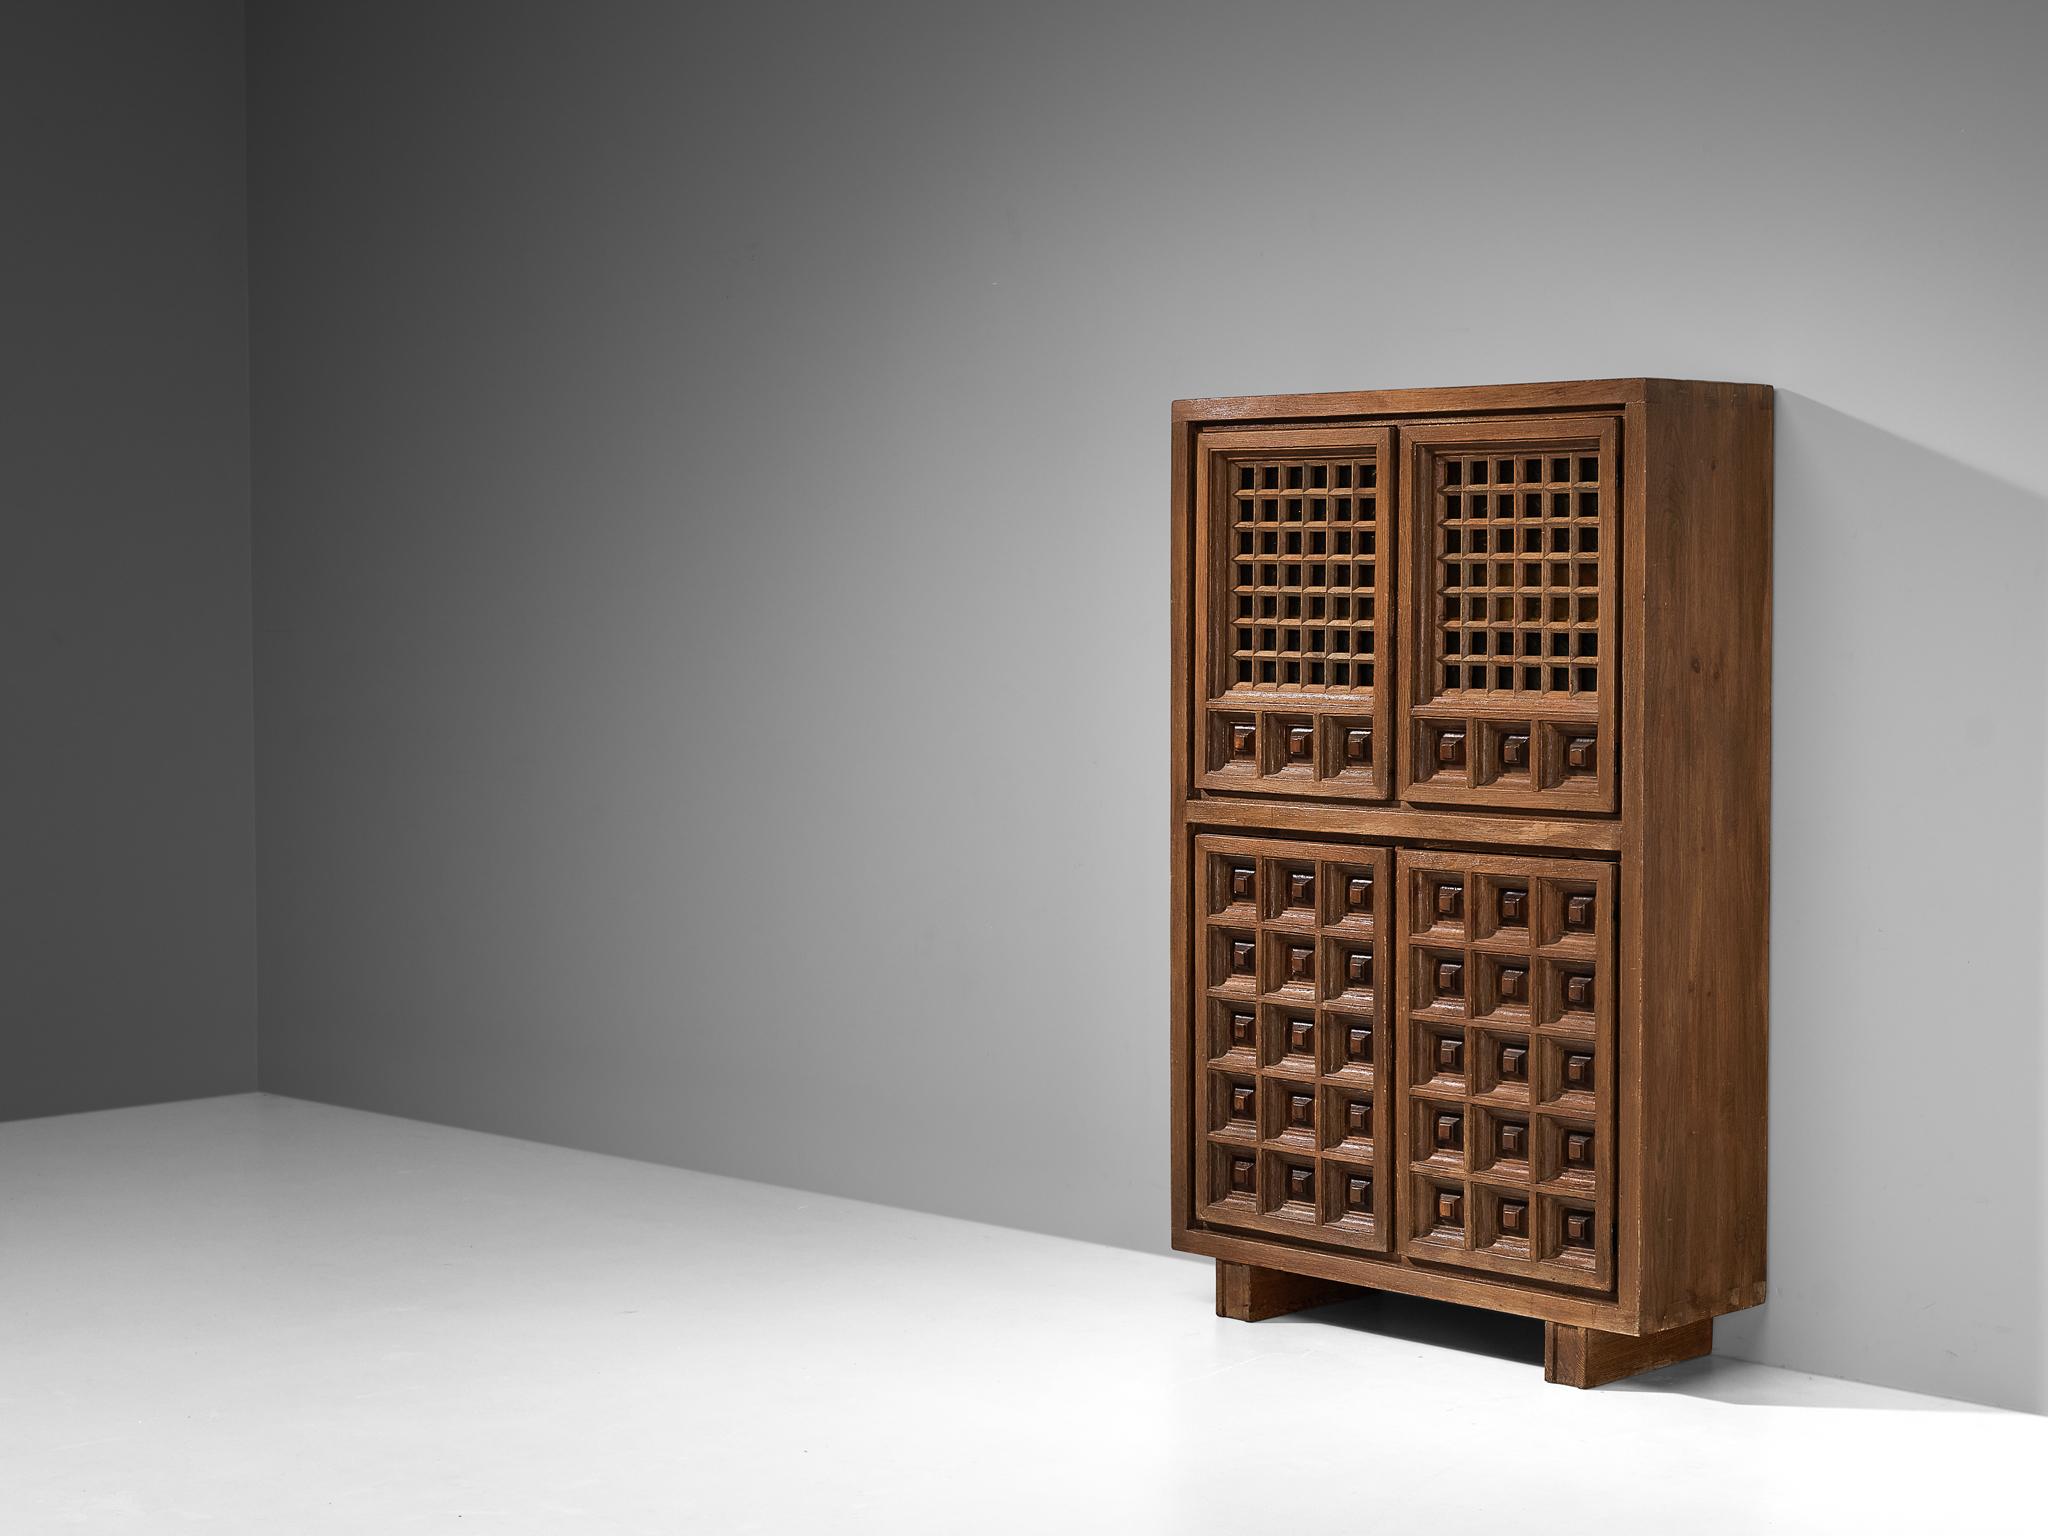 Biosca, highboard, stained pine, Spain, 1960s 

Outstanding Spanish cabinet that is executed by Biosca in an architectural way. The door panels feature a relief surface of graphic carved squares. This is very typical for Brutalist style, while the